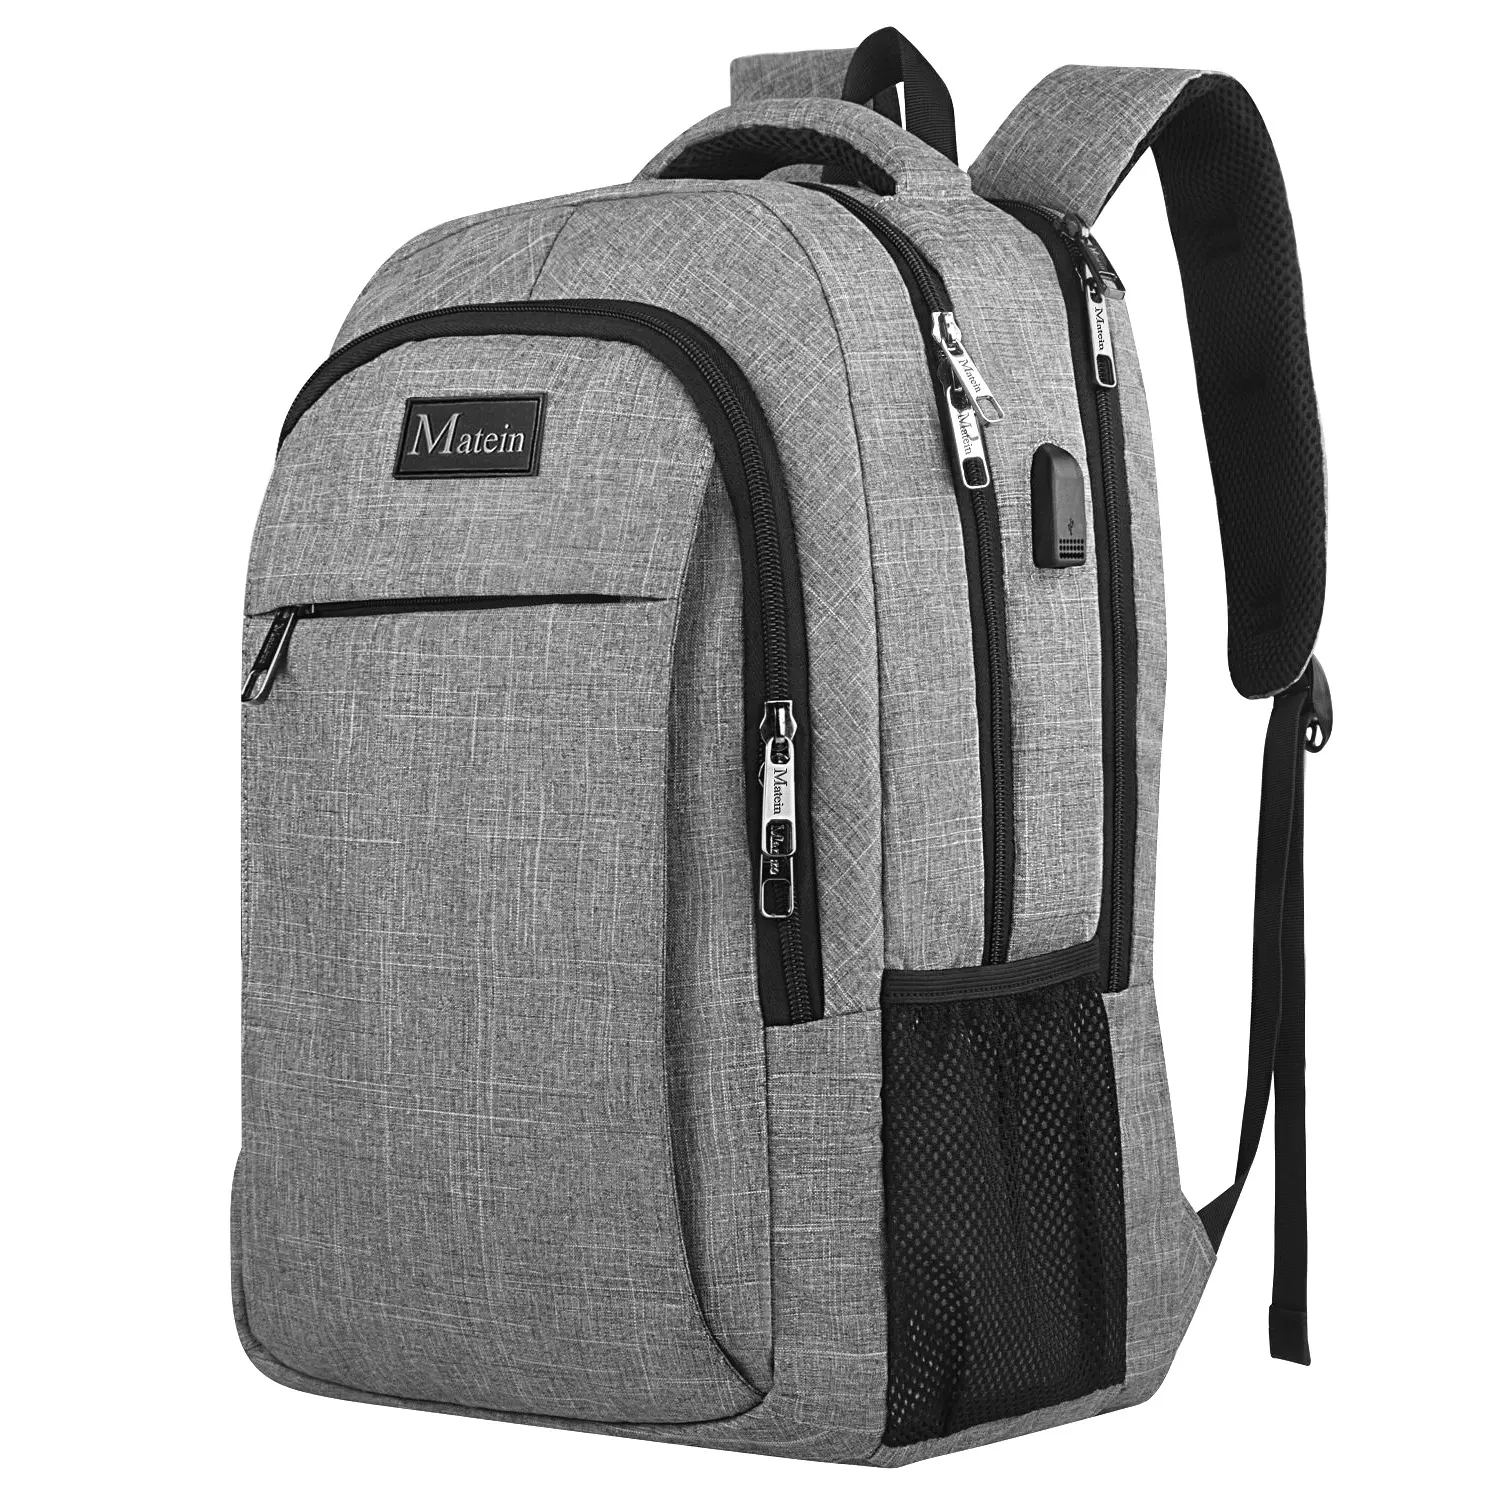 Matein Travel Laptop Backpack Business Anti Theft Slim Durable Laptops Backpack with USB Charging Port travel Bag for Women men